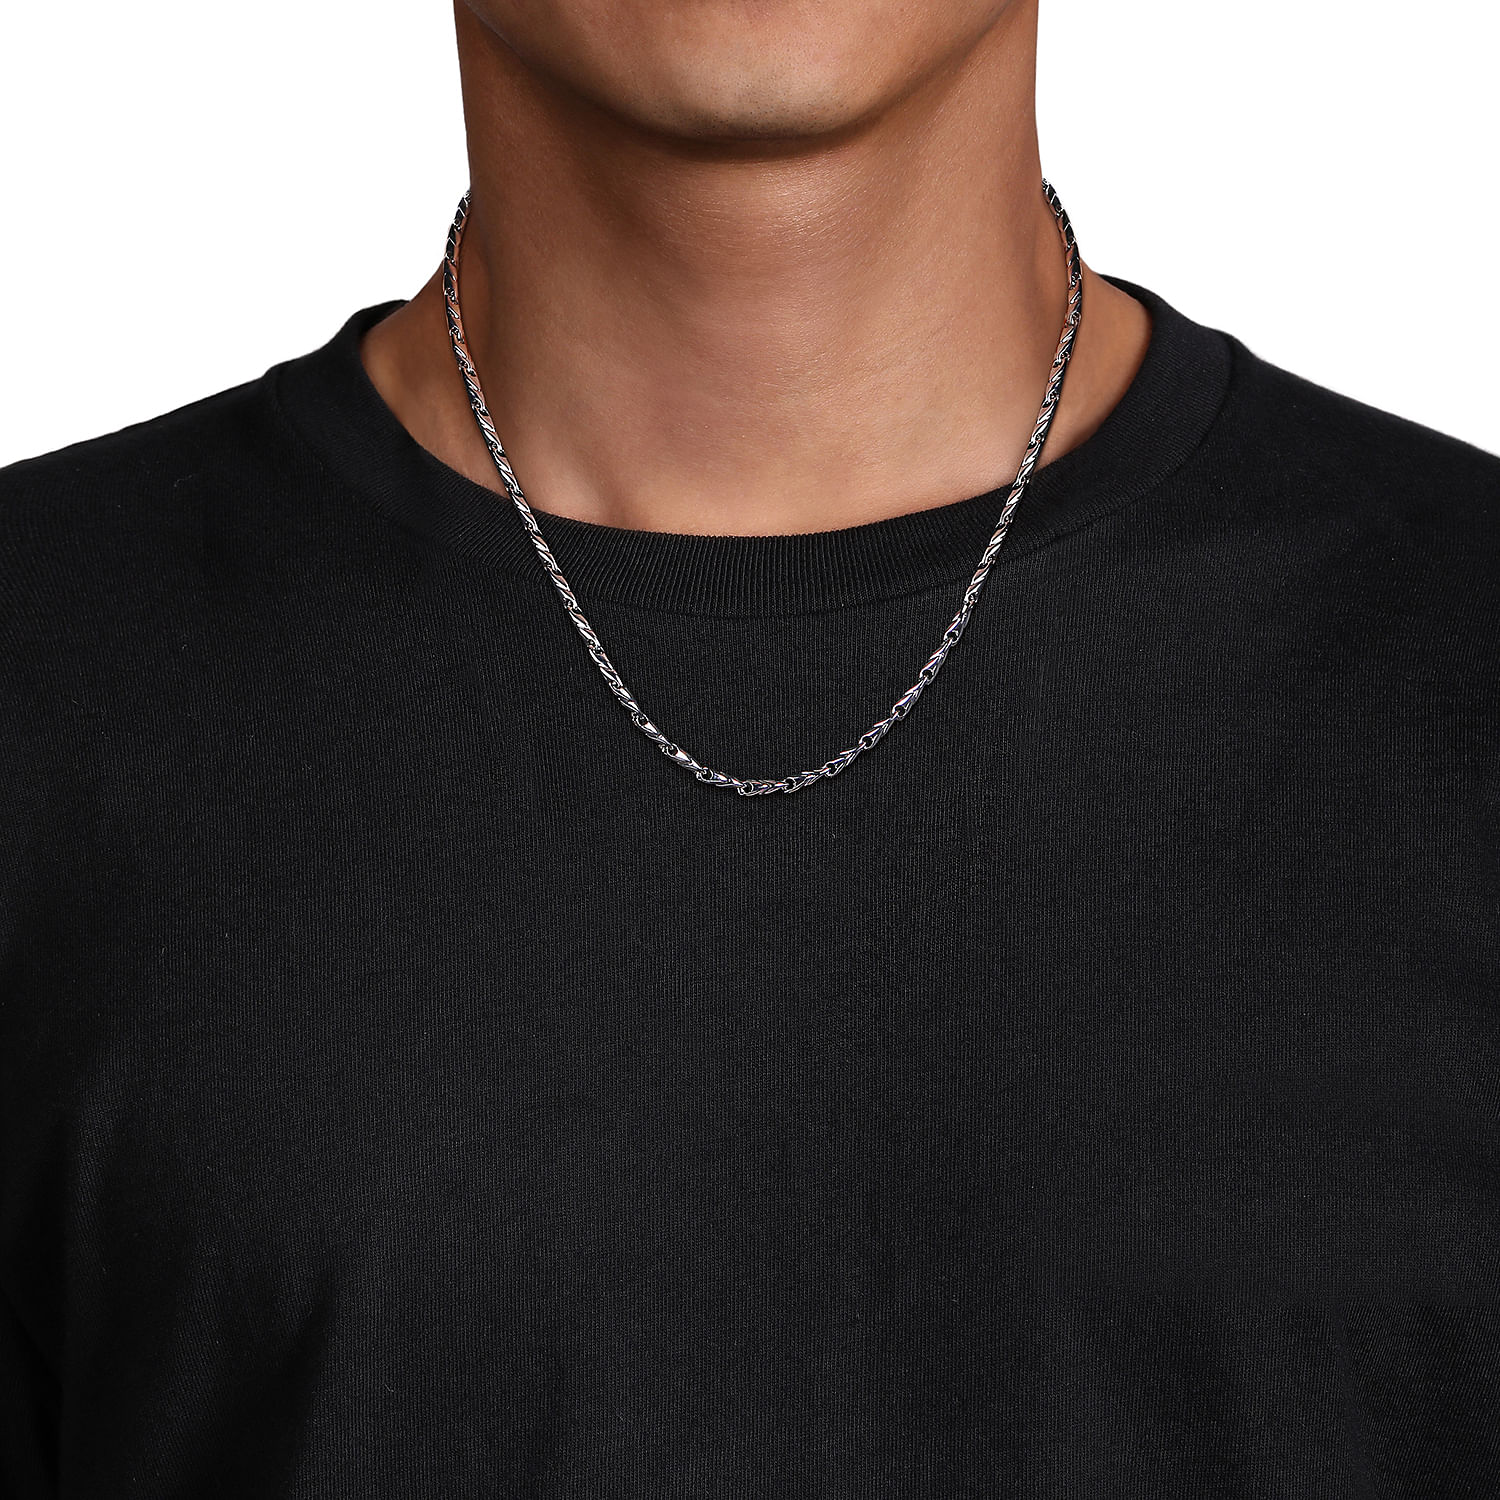 20 Inch 925 Sterling Silver Men's Chain Necklace